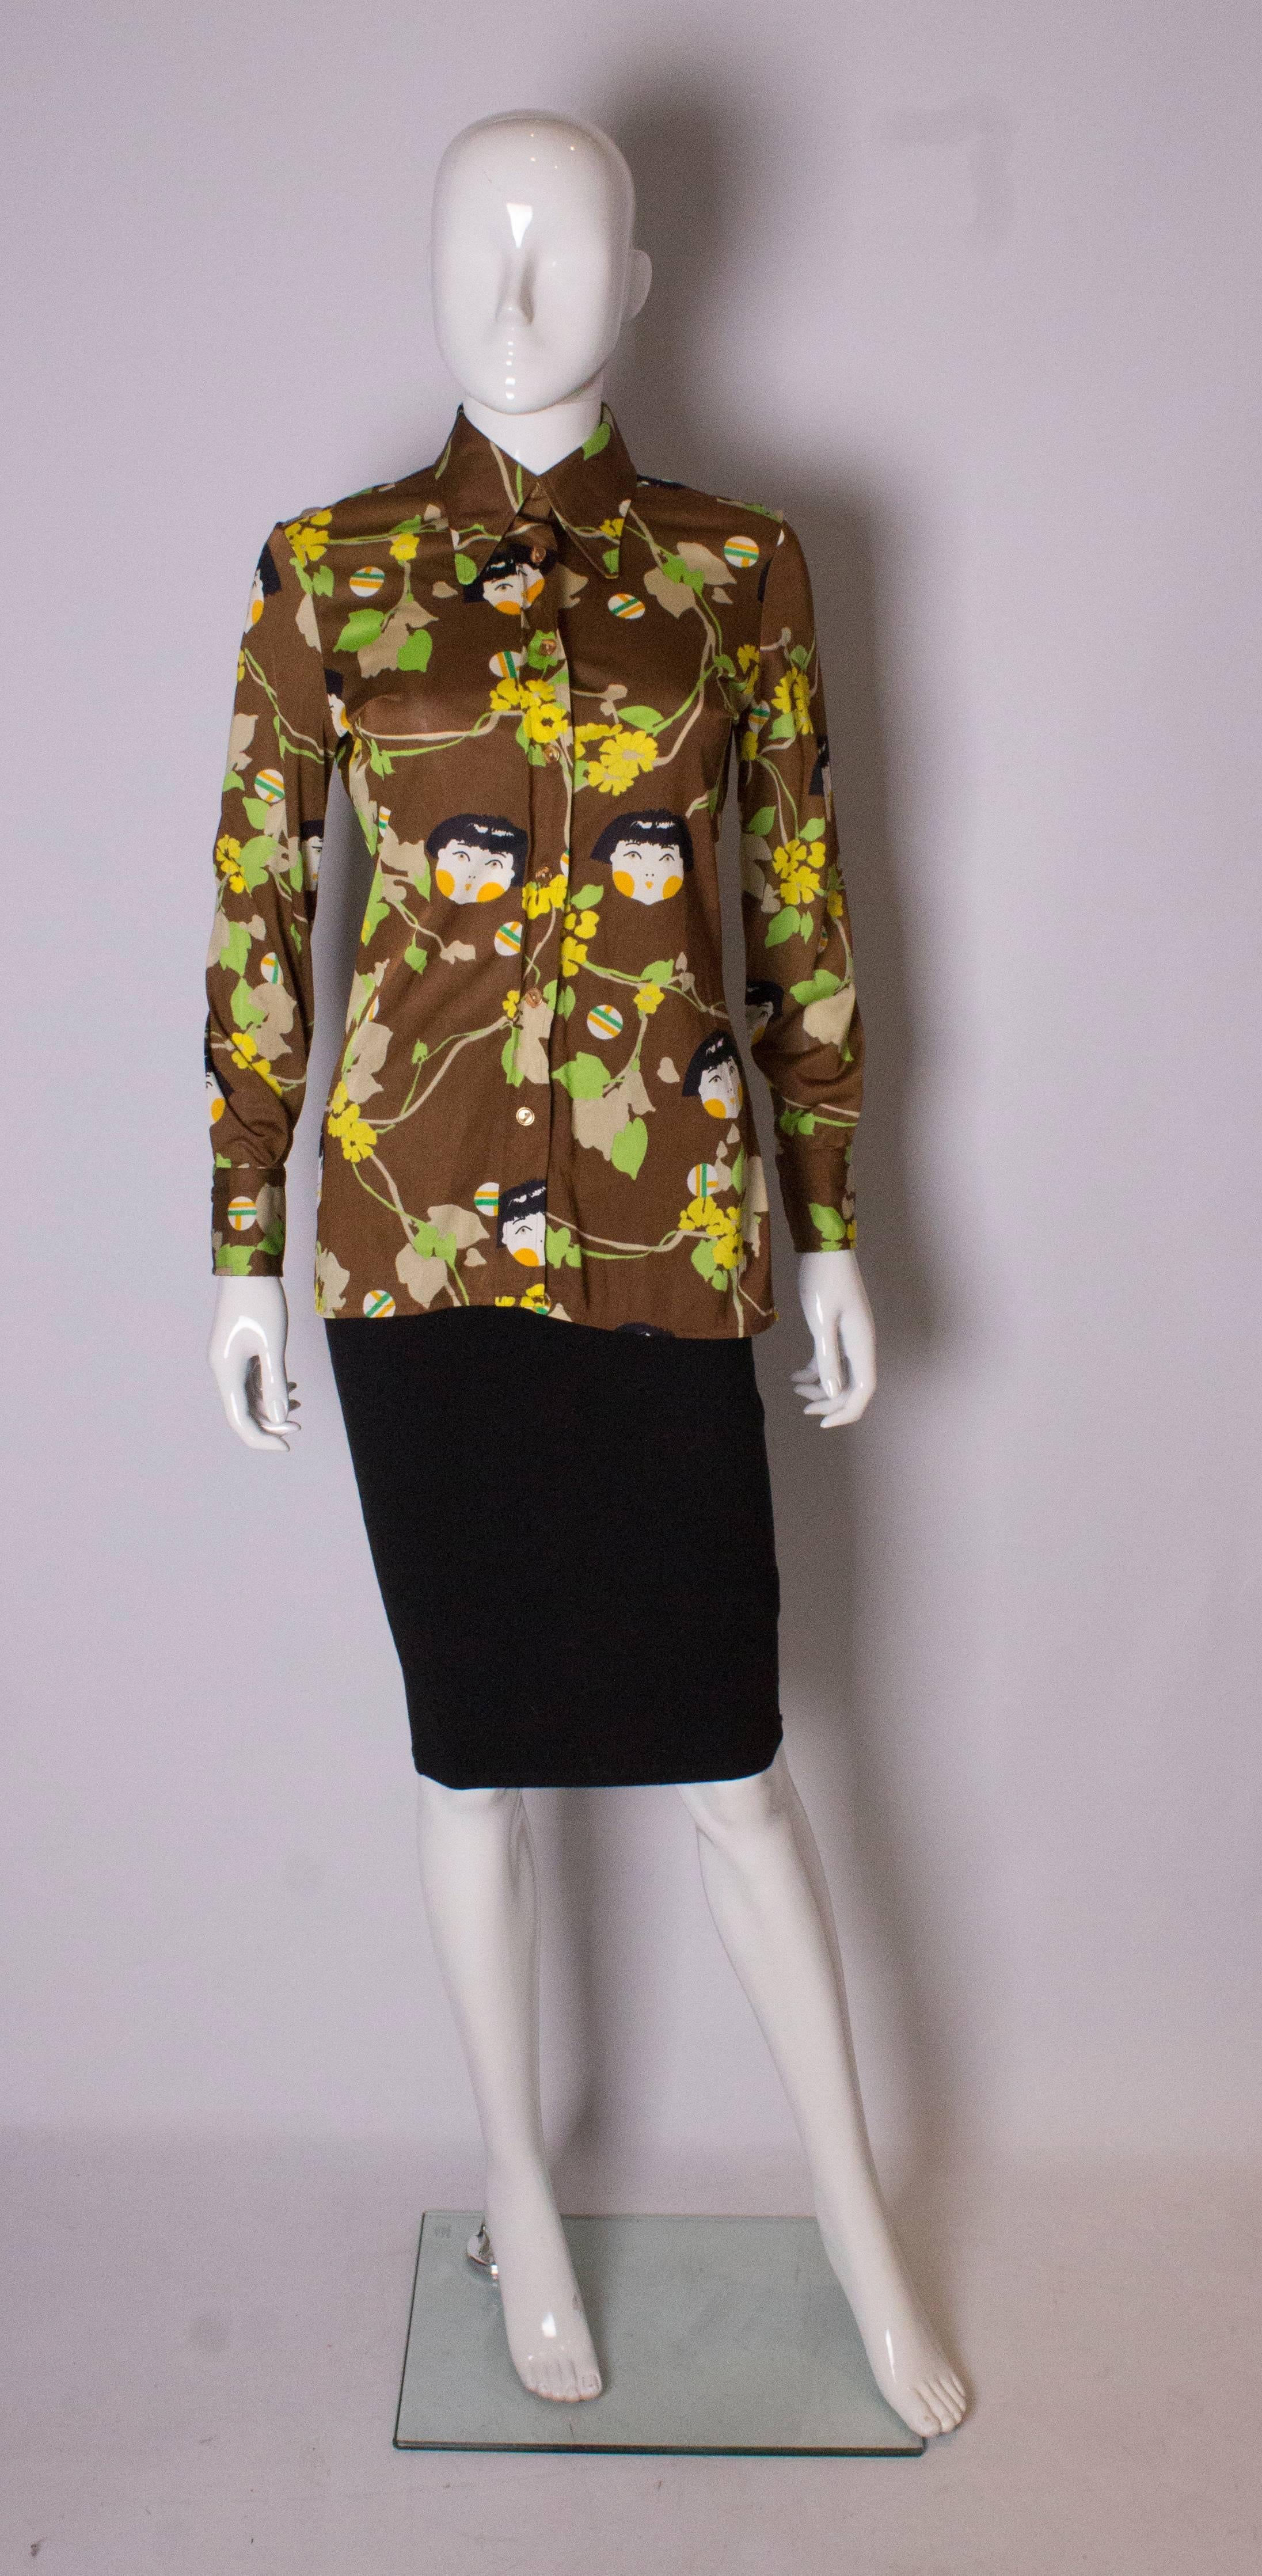 A great vintage  shirt by Elli, Europe Craft of Italy. The shirt is made of a textured nylon with double button cuffs. It has a brown background with a green and yellow, face and flora print.